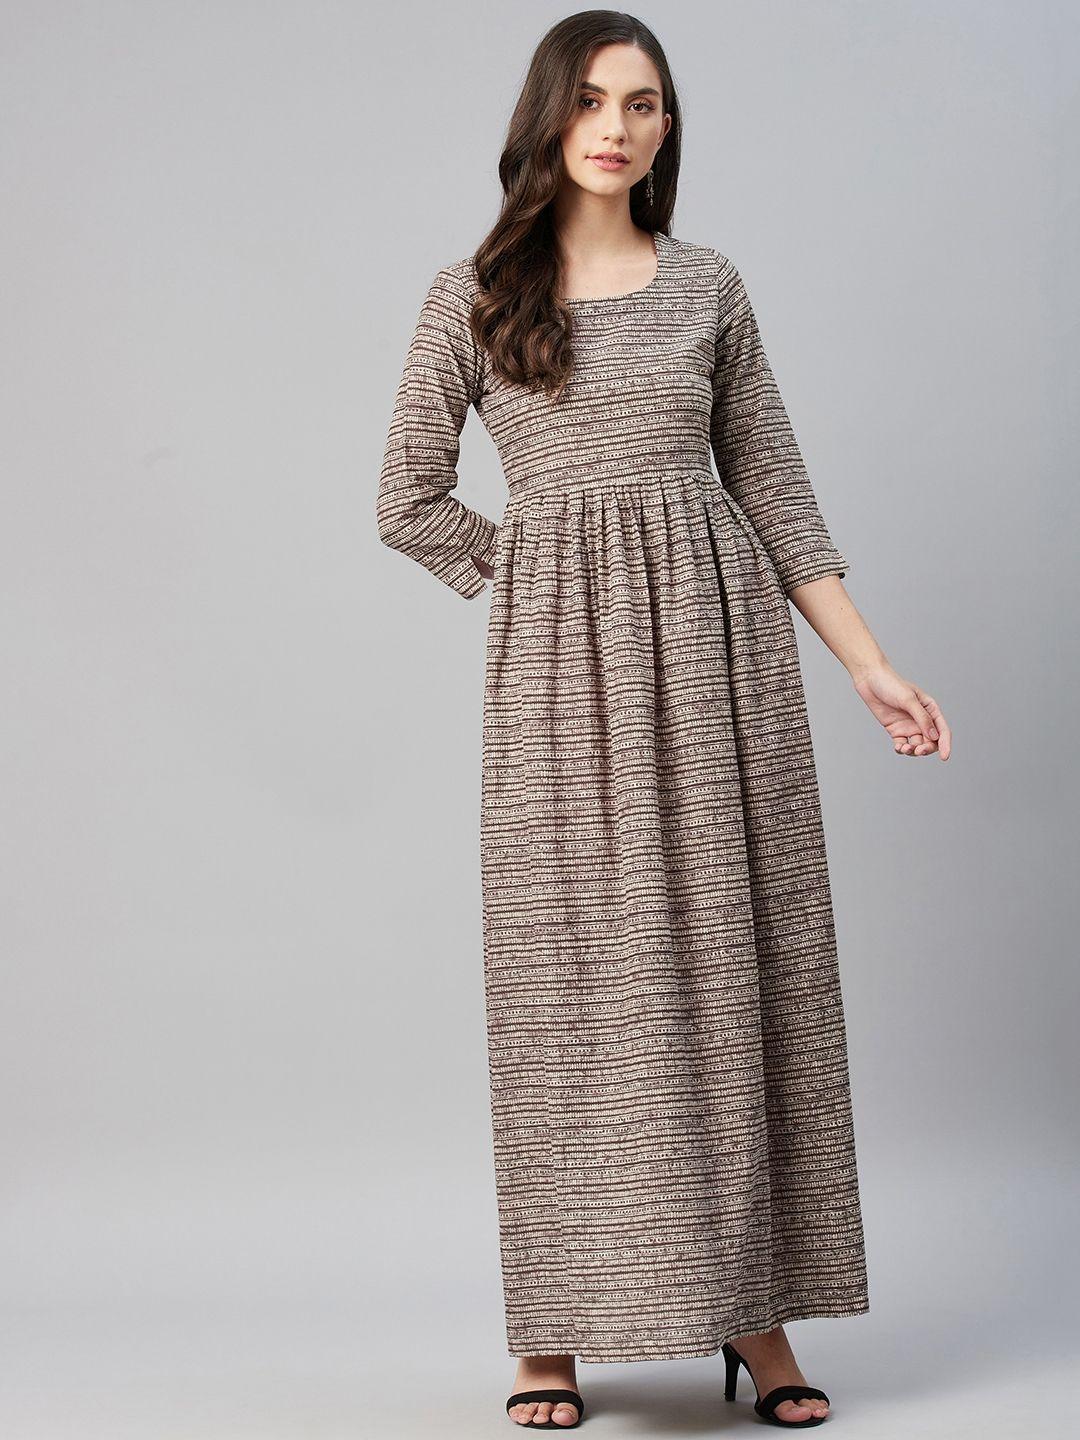 mbe brown & beige ethnic printed cotton maxi dress